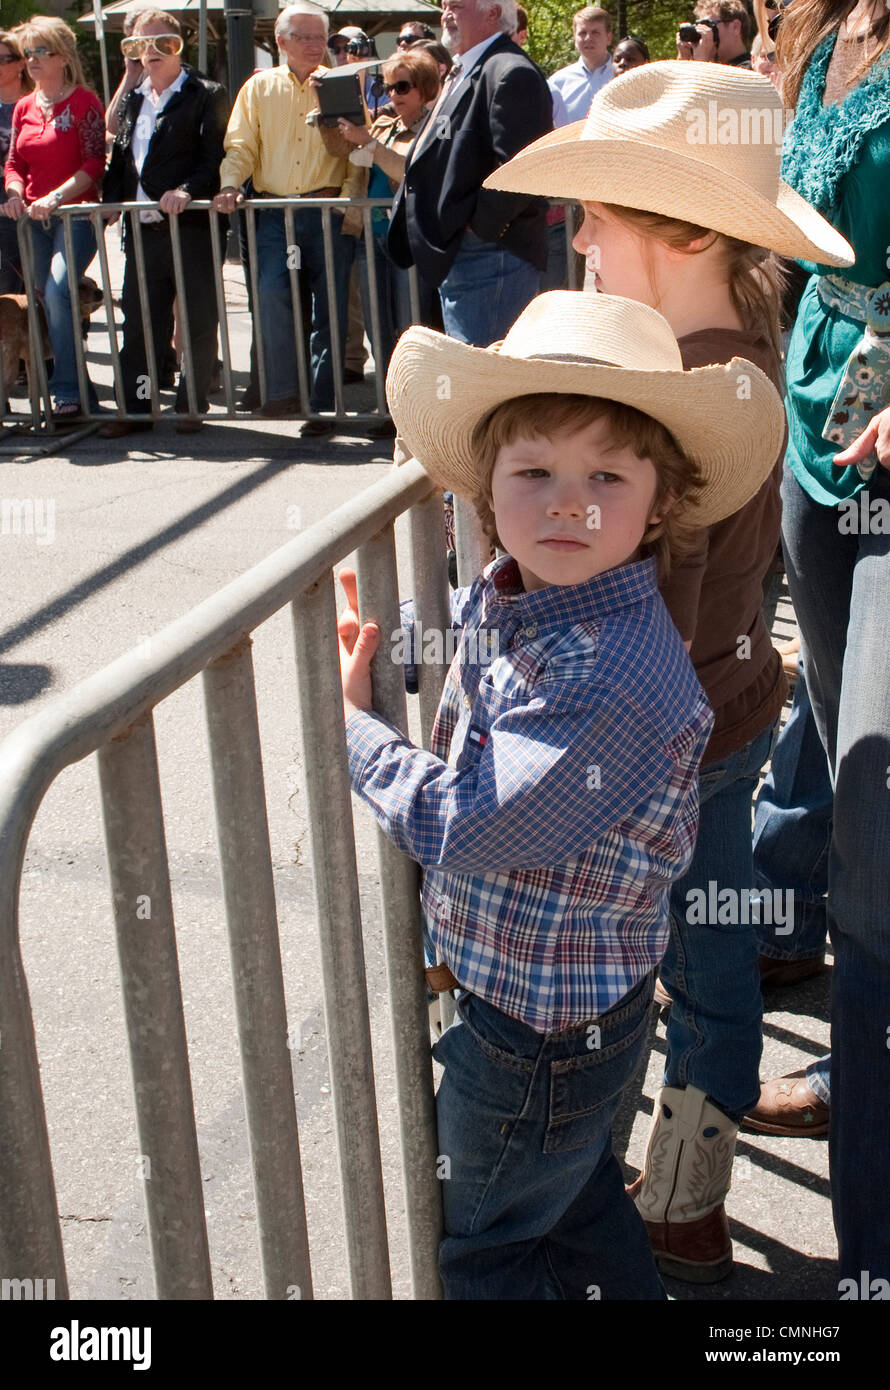 Young boy and young girl wearing cowboy hats at outdoor Texas Rodeo event Stock Photo